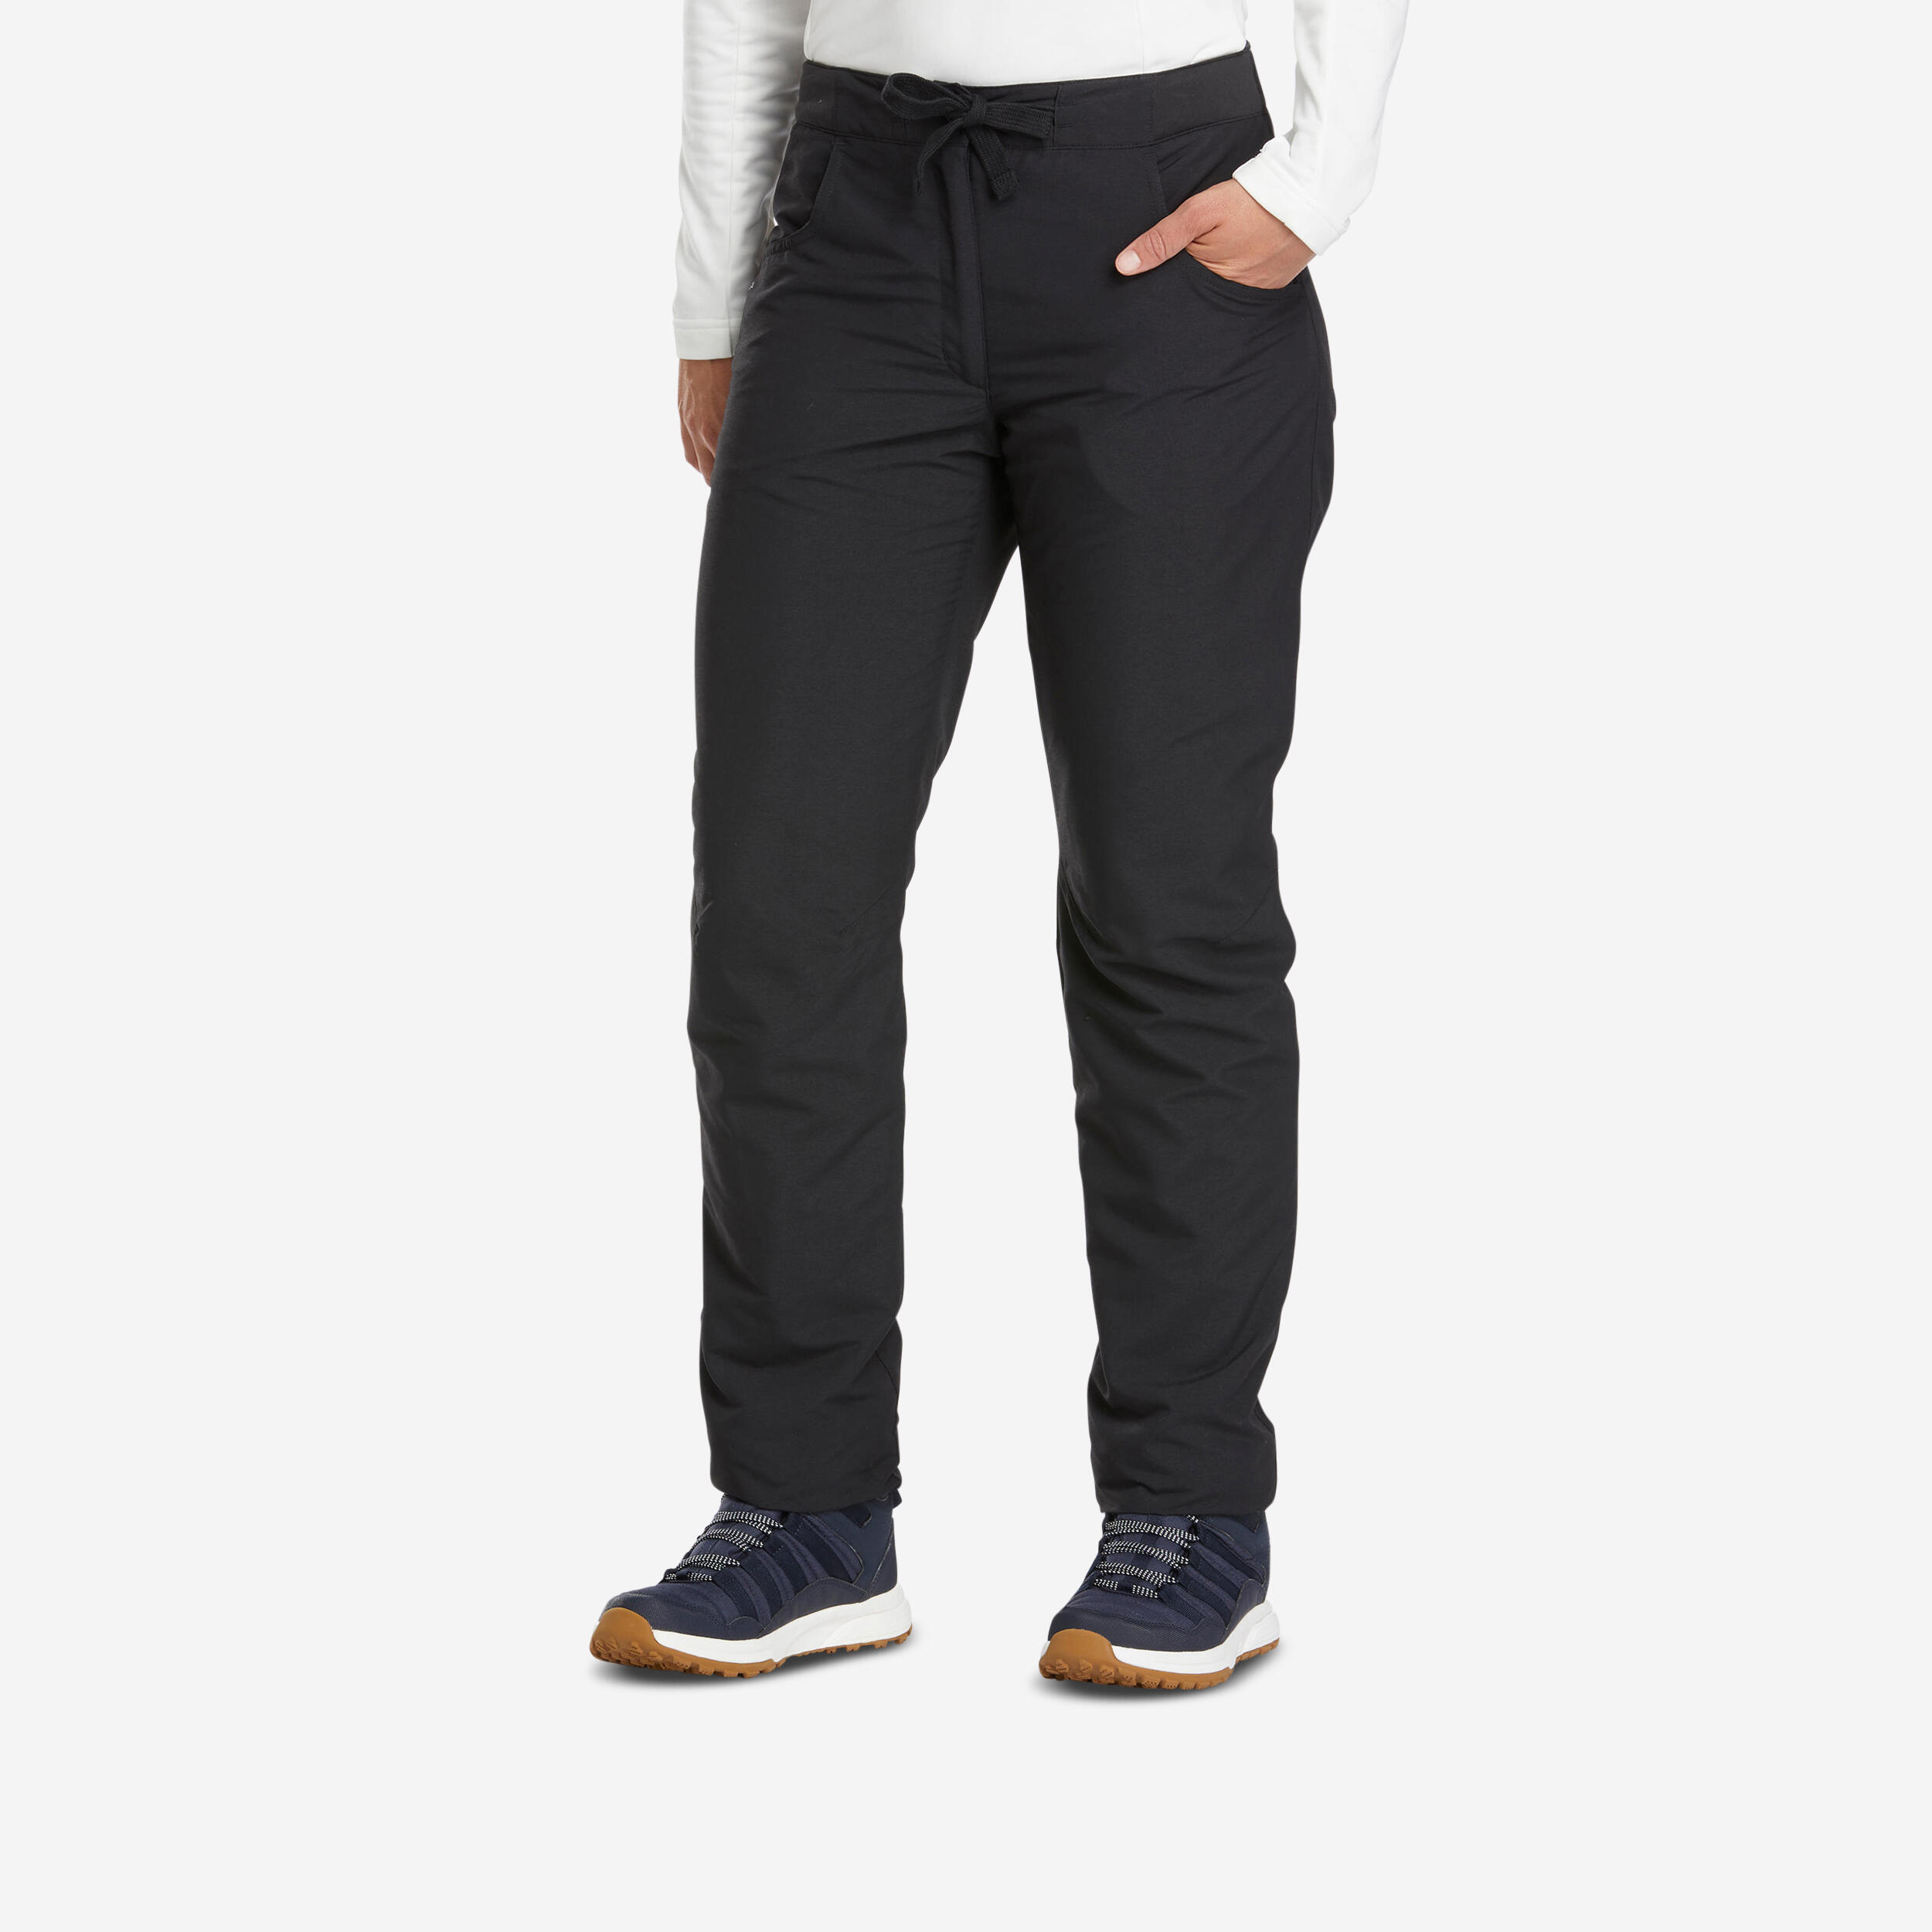 Buy Regatta Pentre Stretch Walking Trousers from Next India